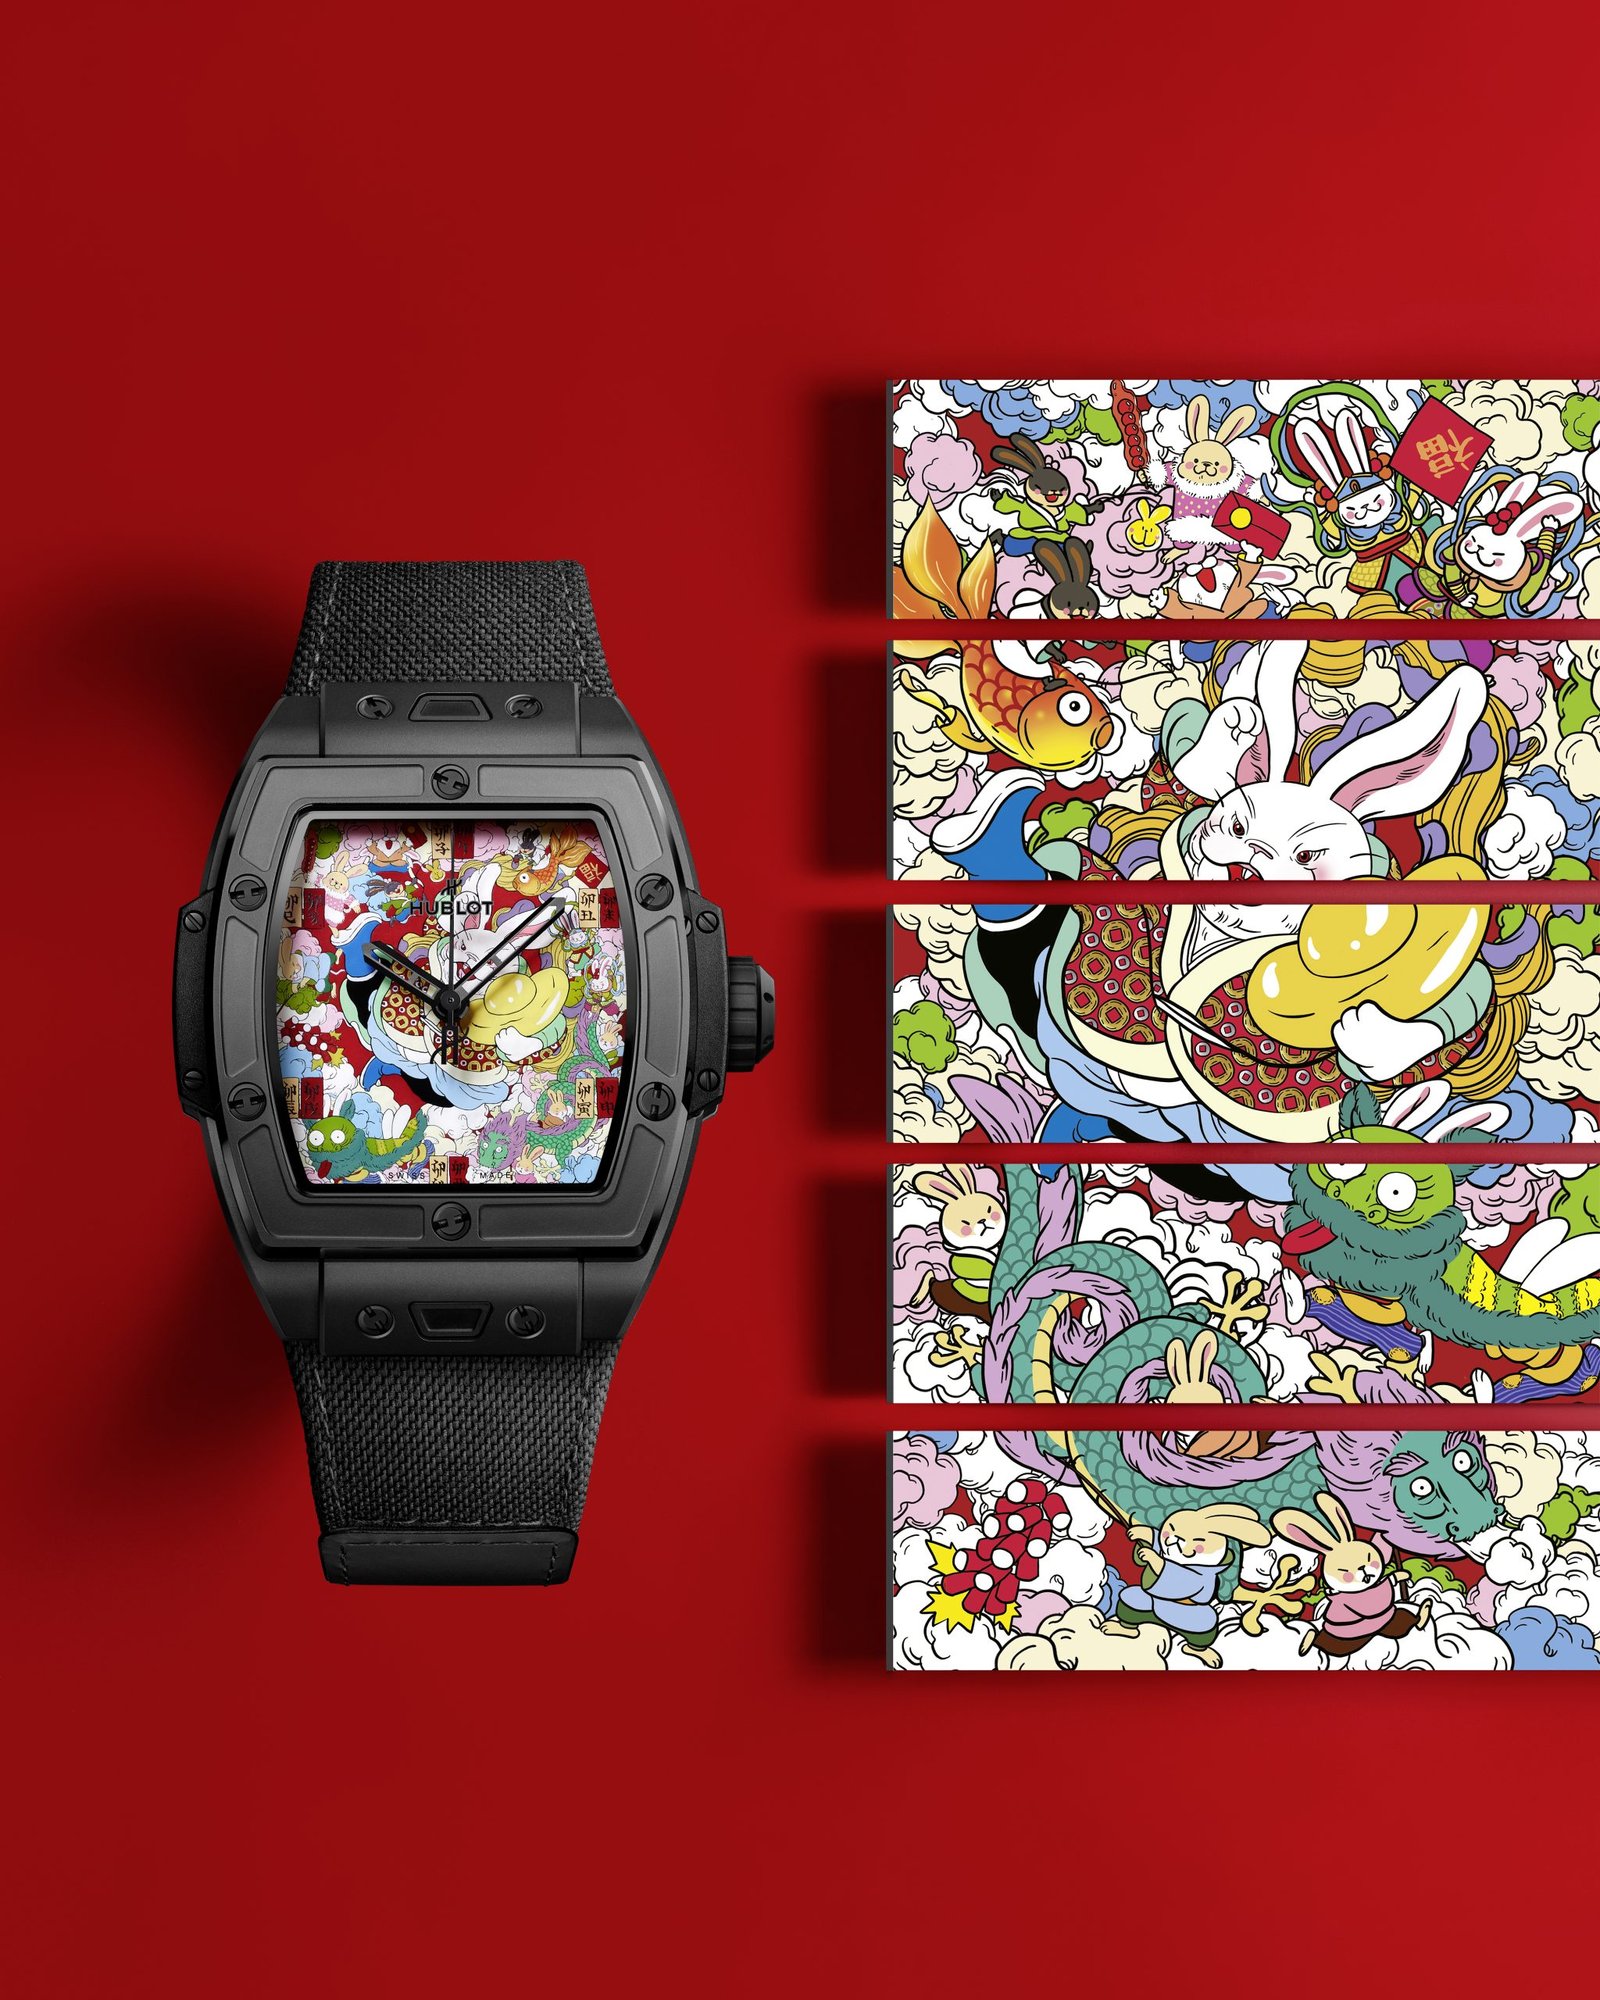 HUBLOT CELEBRATES THE YEAR OF THE RABBIT: “HAPPY 兔-GETHER (TO-GETHER)” © Copyright PLPG GLOBAL MEDIA 2023